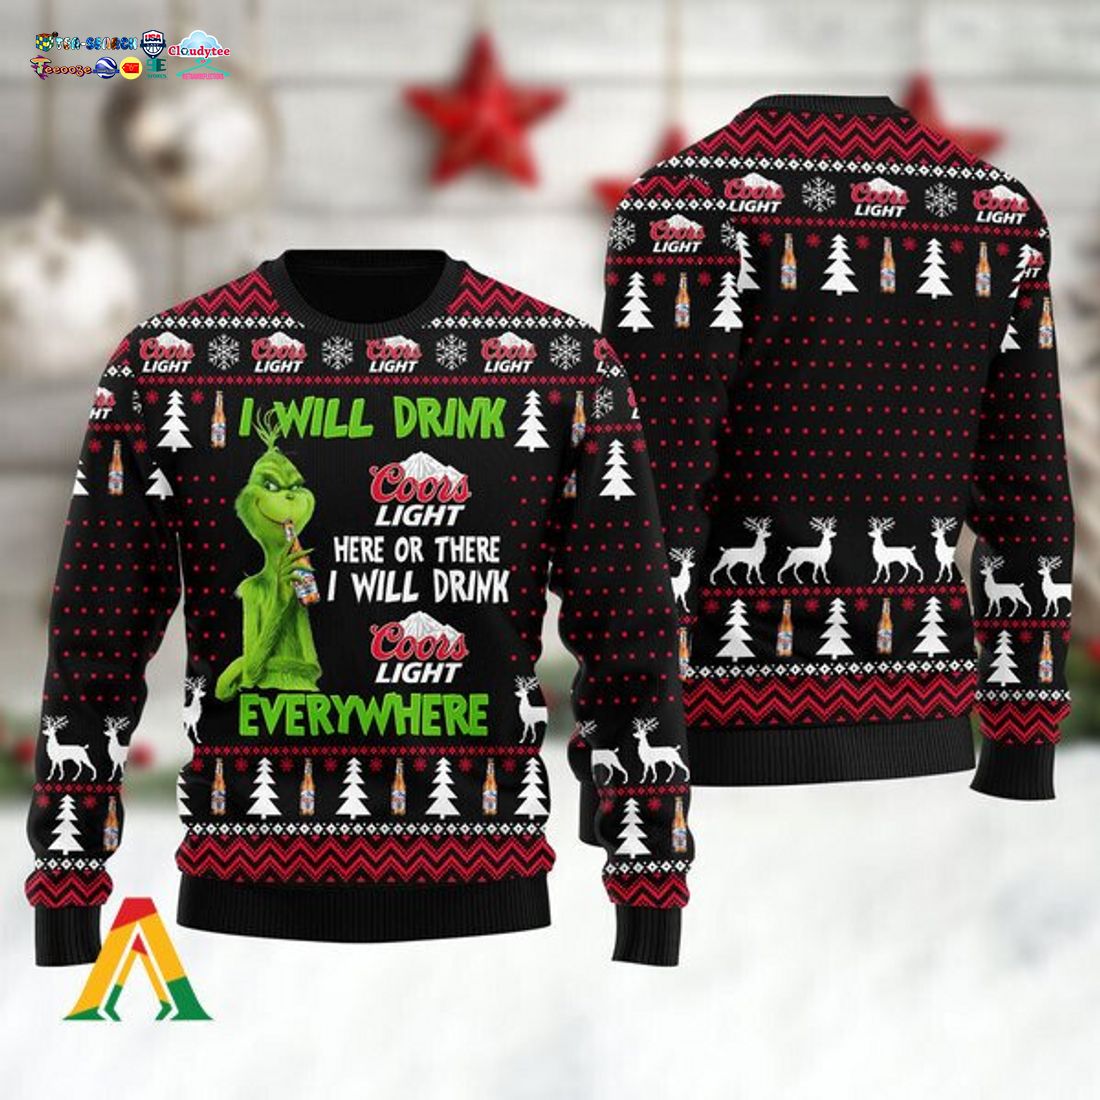 grinch-i-will-drink-coors-light-everywhere-ver-2-ugly-christmas-sweater-1-CqTaT.jpg